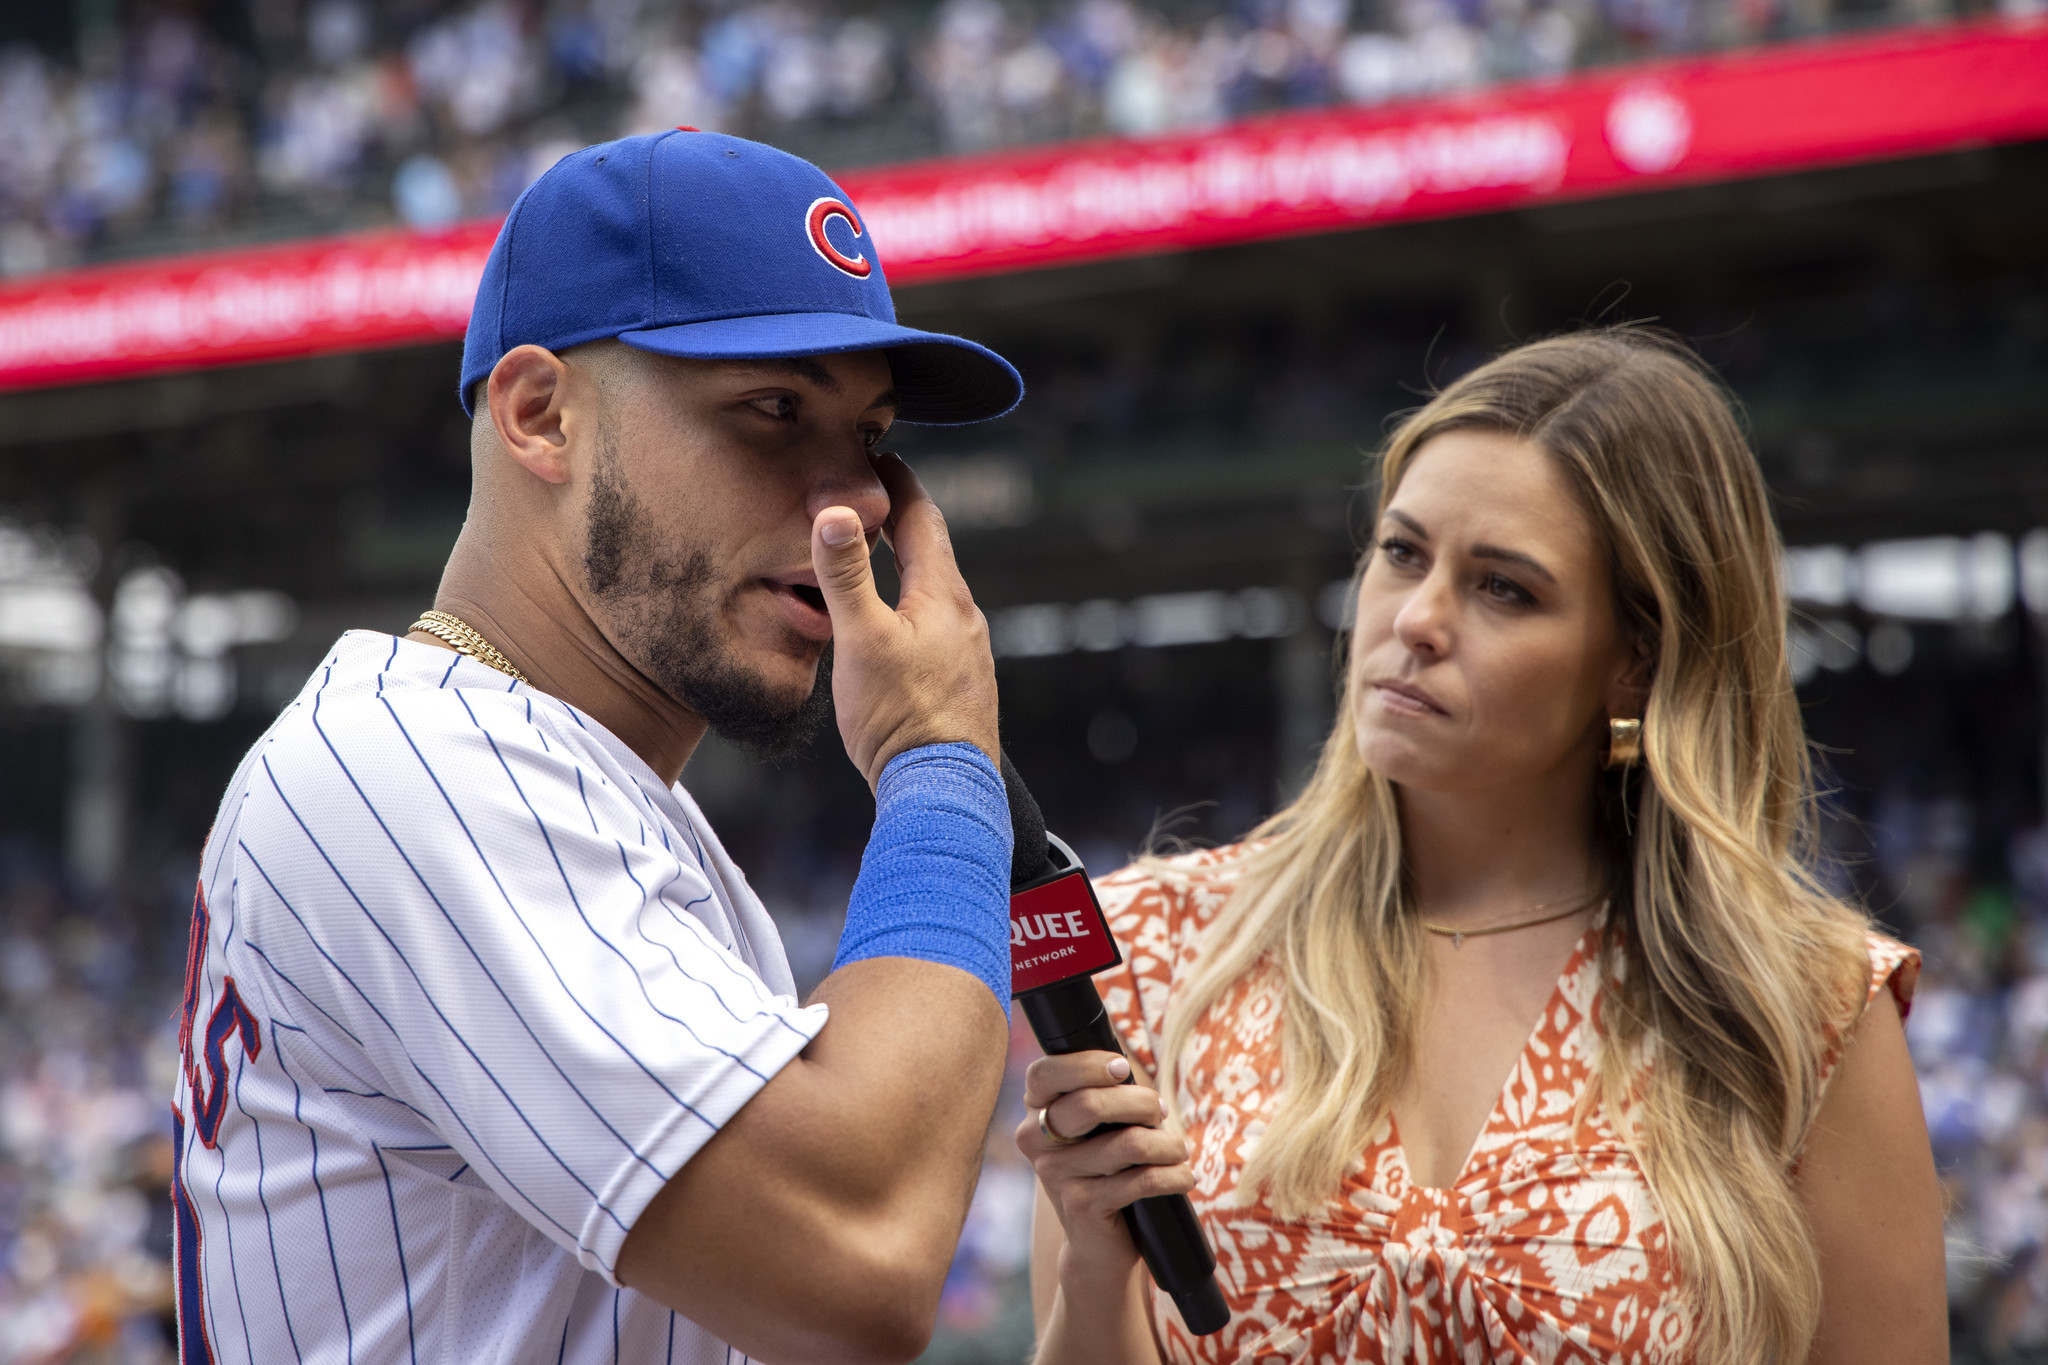 Contreras orchestrates heel turn as Cubs lose to St. Louis